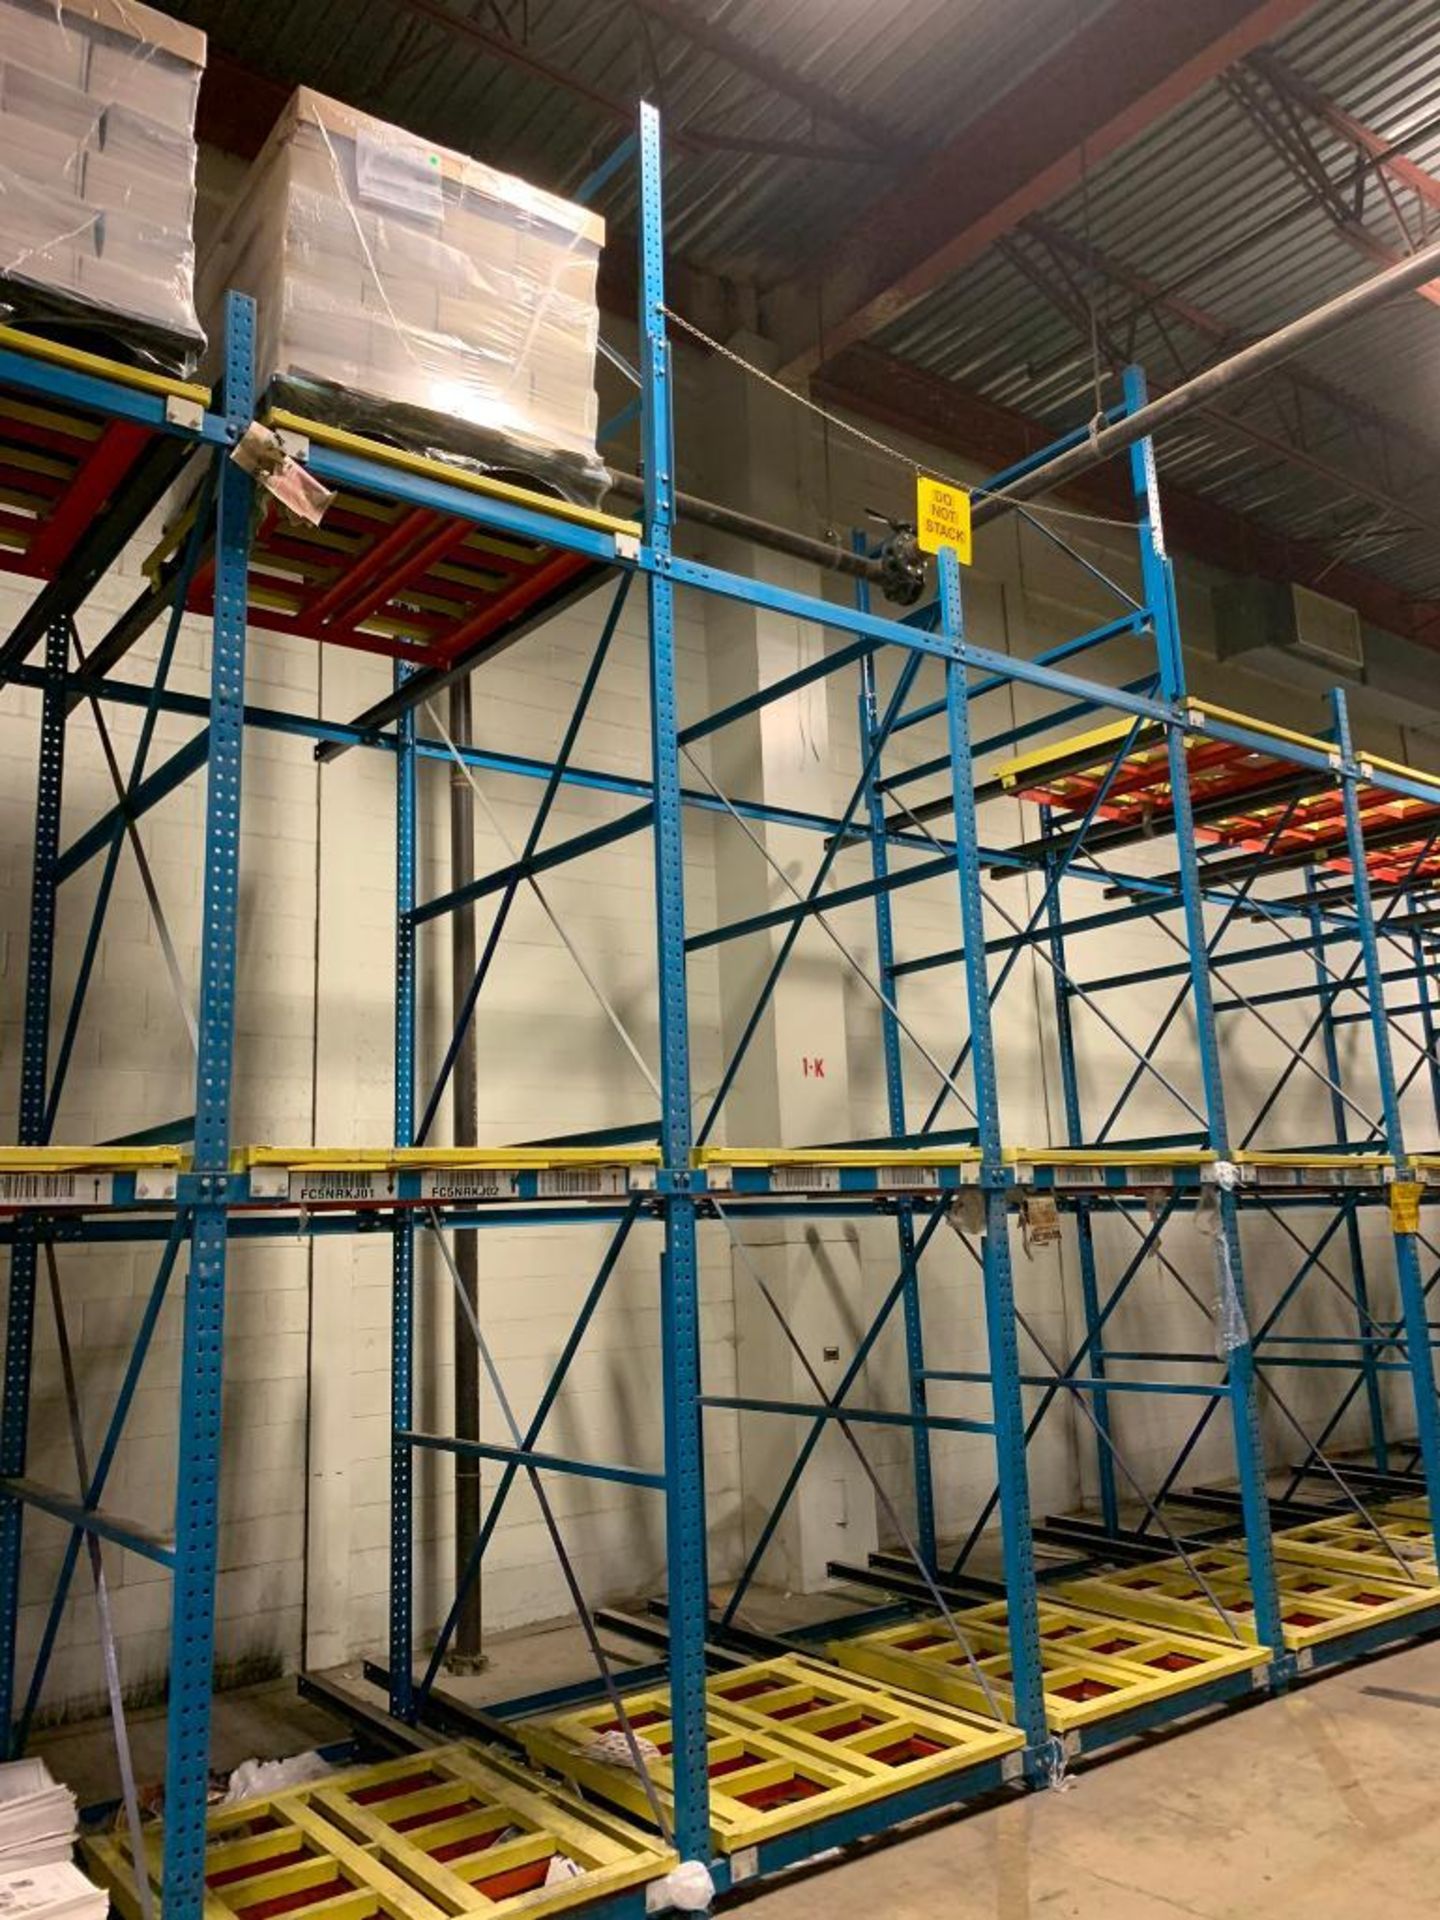 (33x) Bays of Bolt-Together Push-Back Rack; 15' T X 104" D, Each Bay Has (6) Pallet Positions - Image 5 of 10